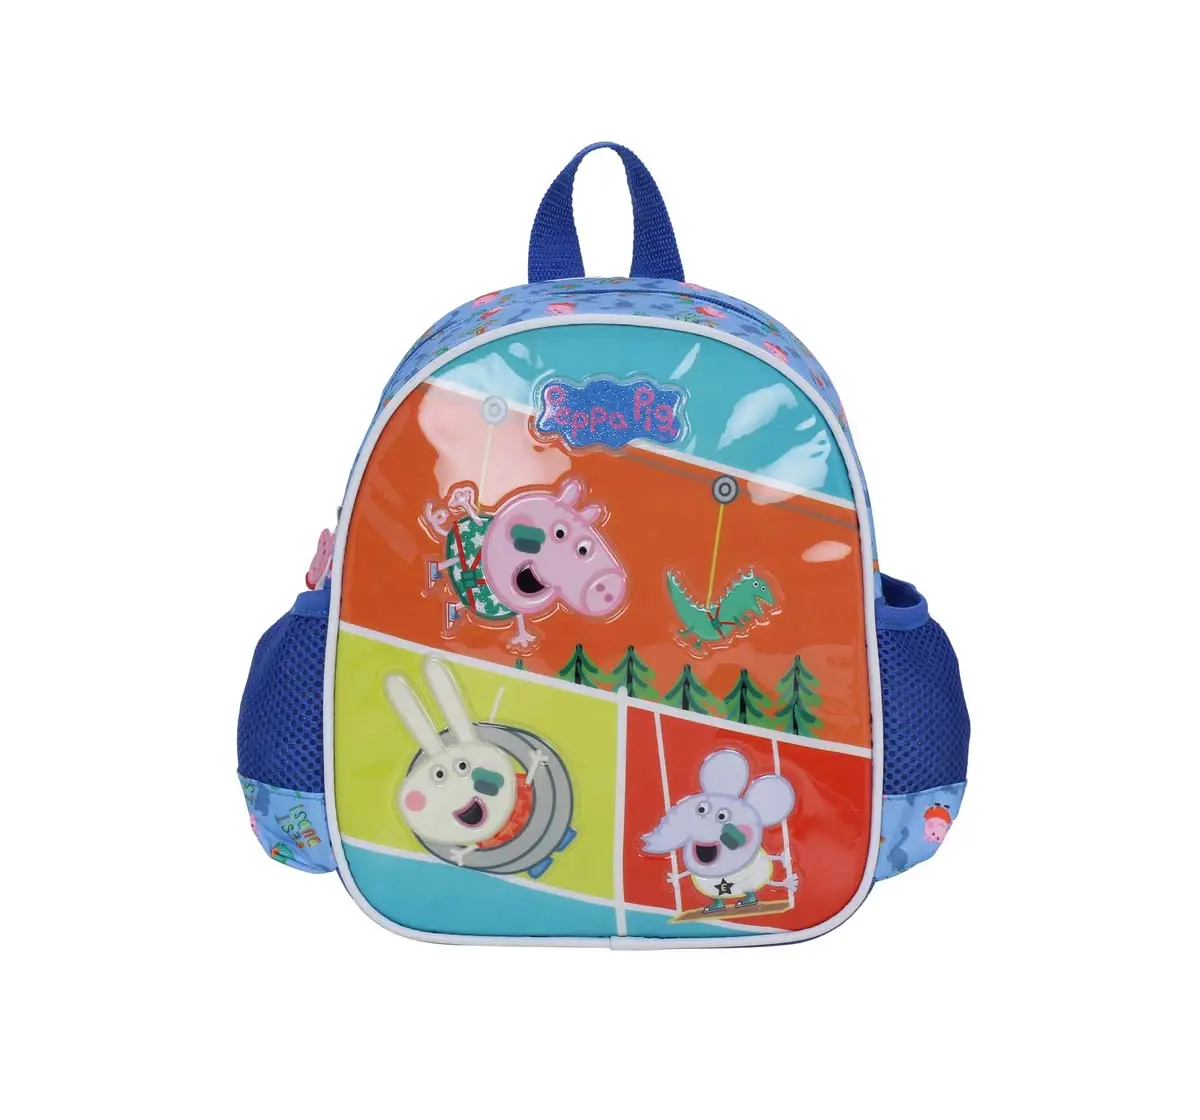 Peppa Pig Garden Play 10 Backpack Bags for Kids age 3Y+ 